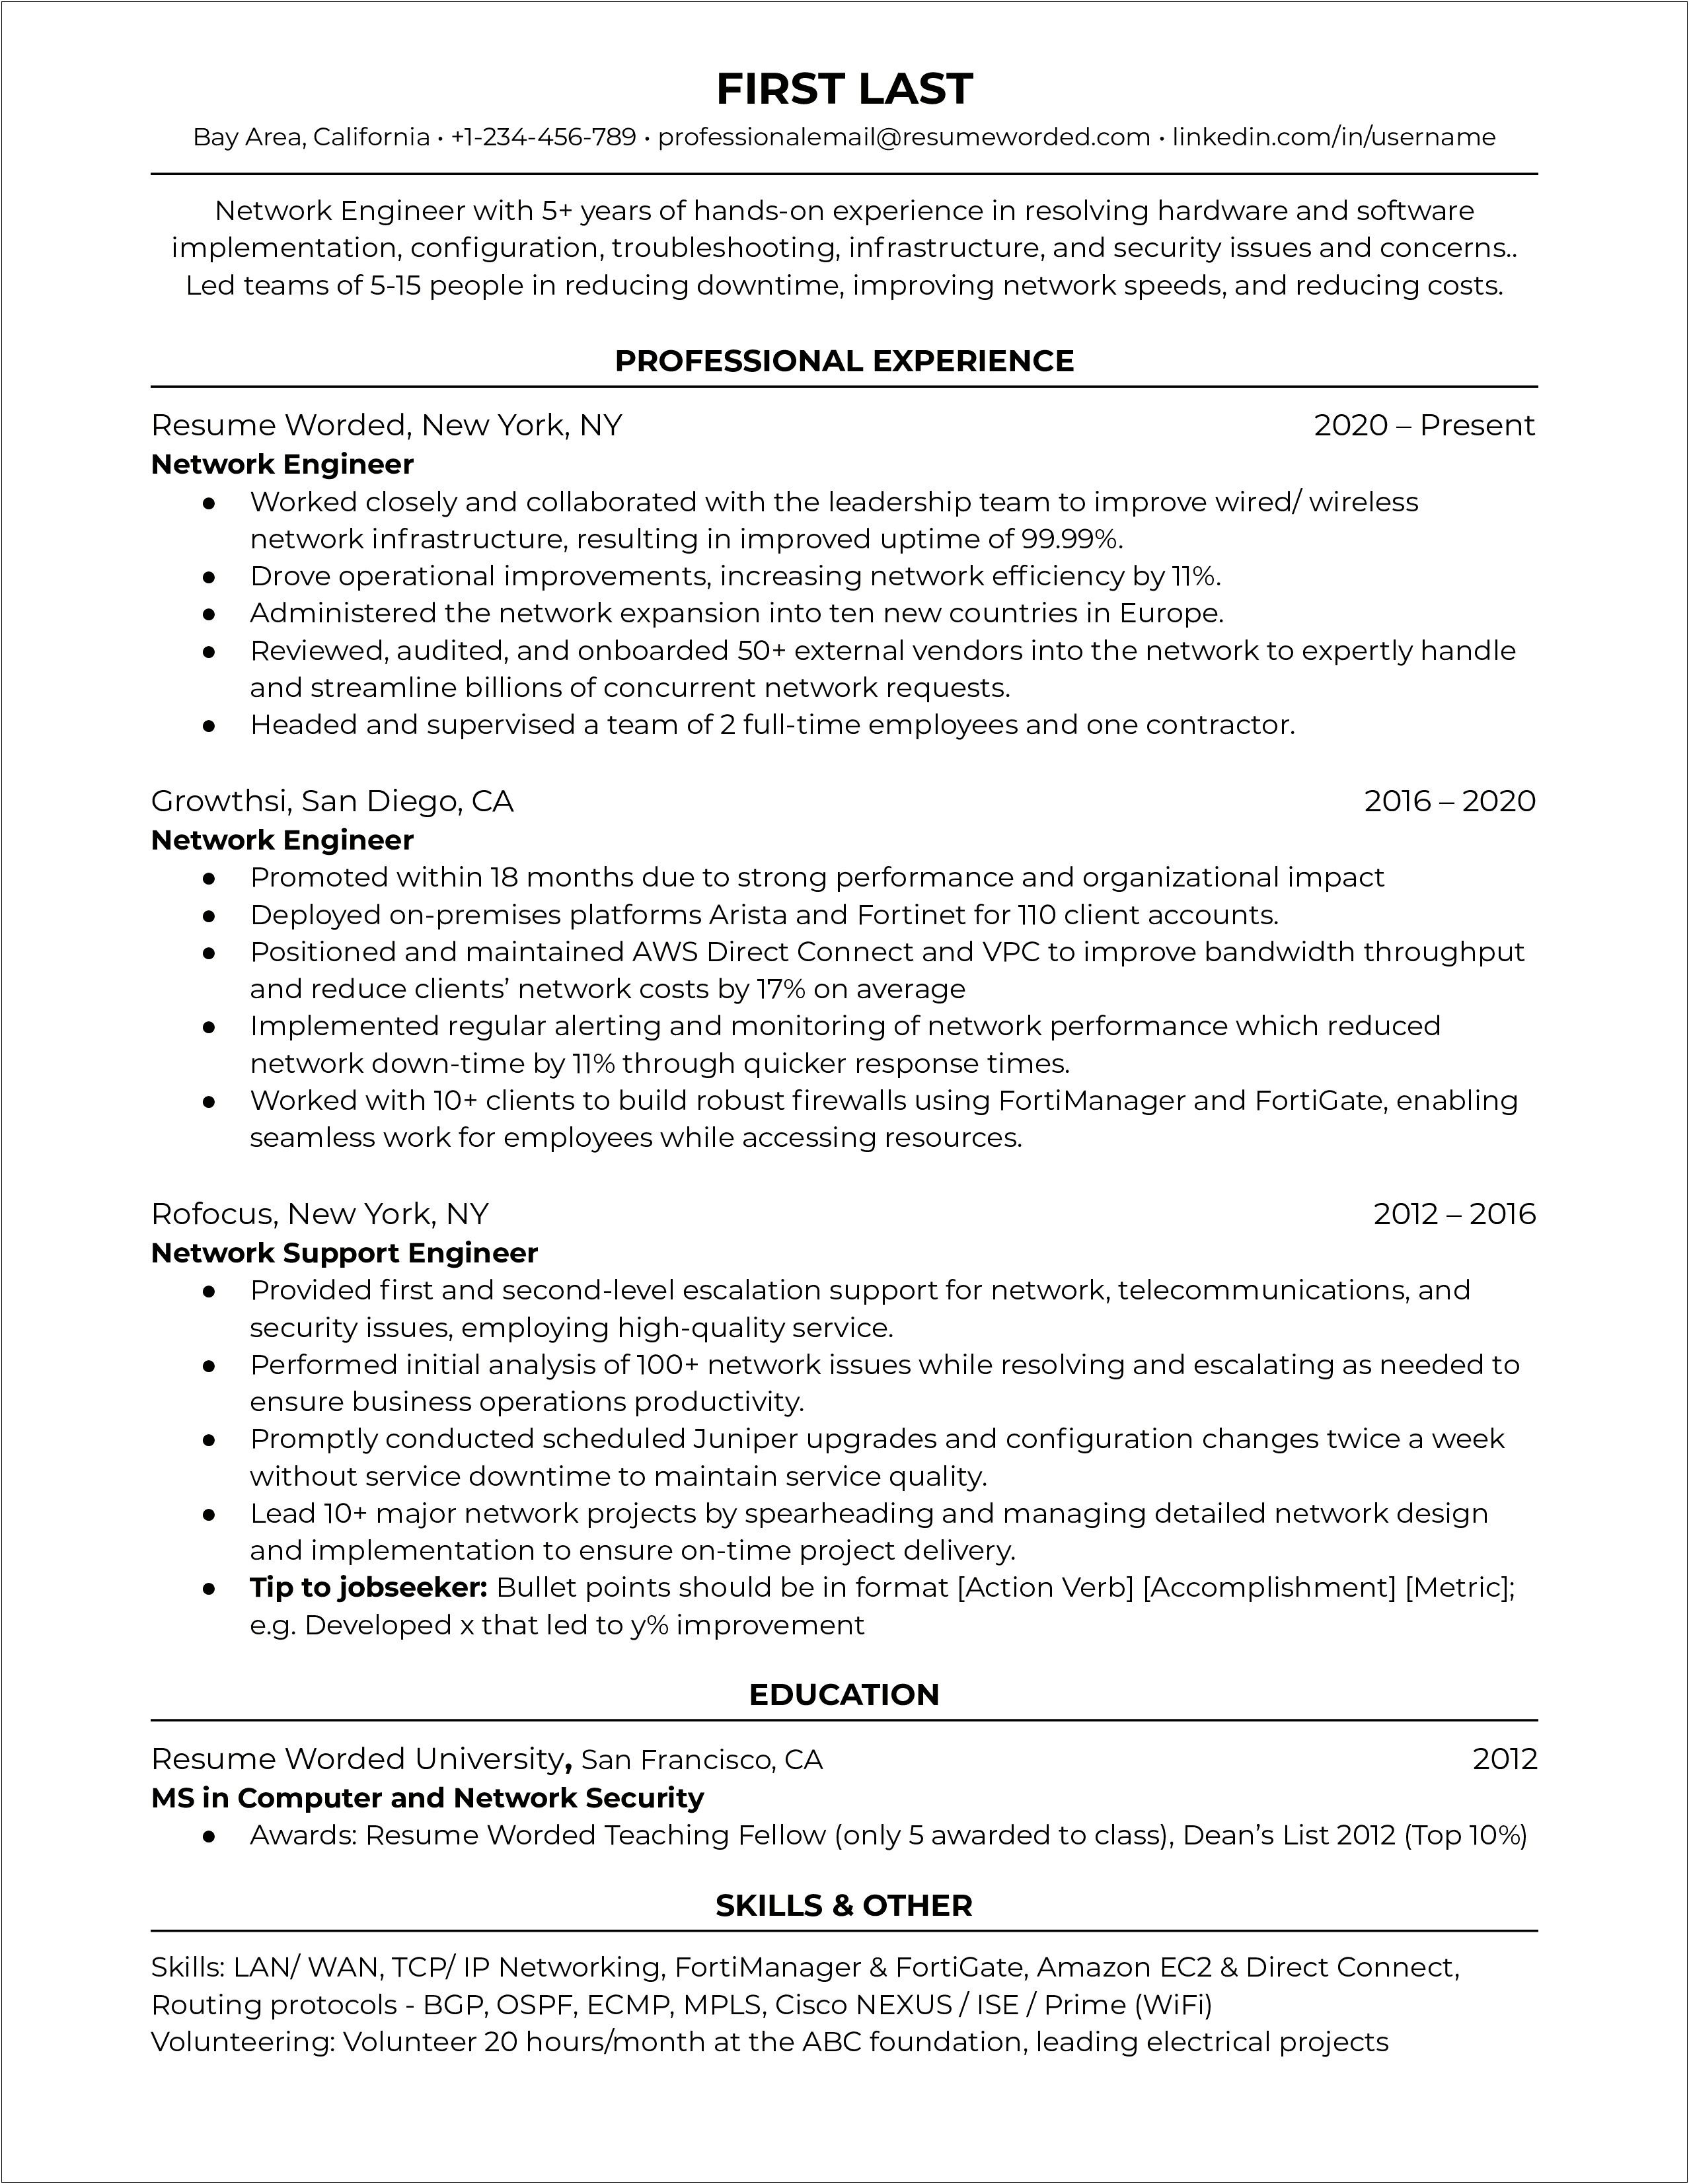 Networking Skills On A Resume